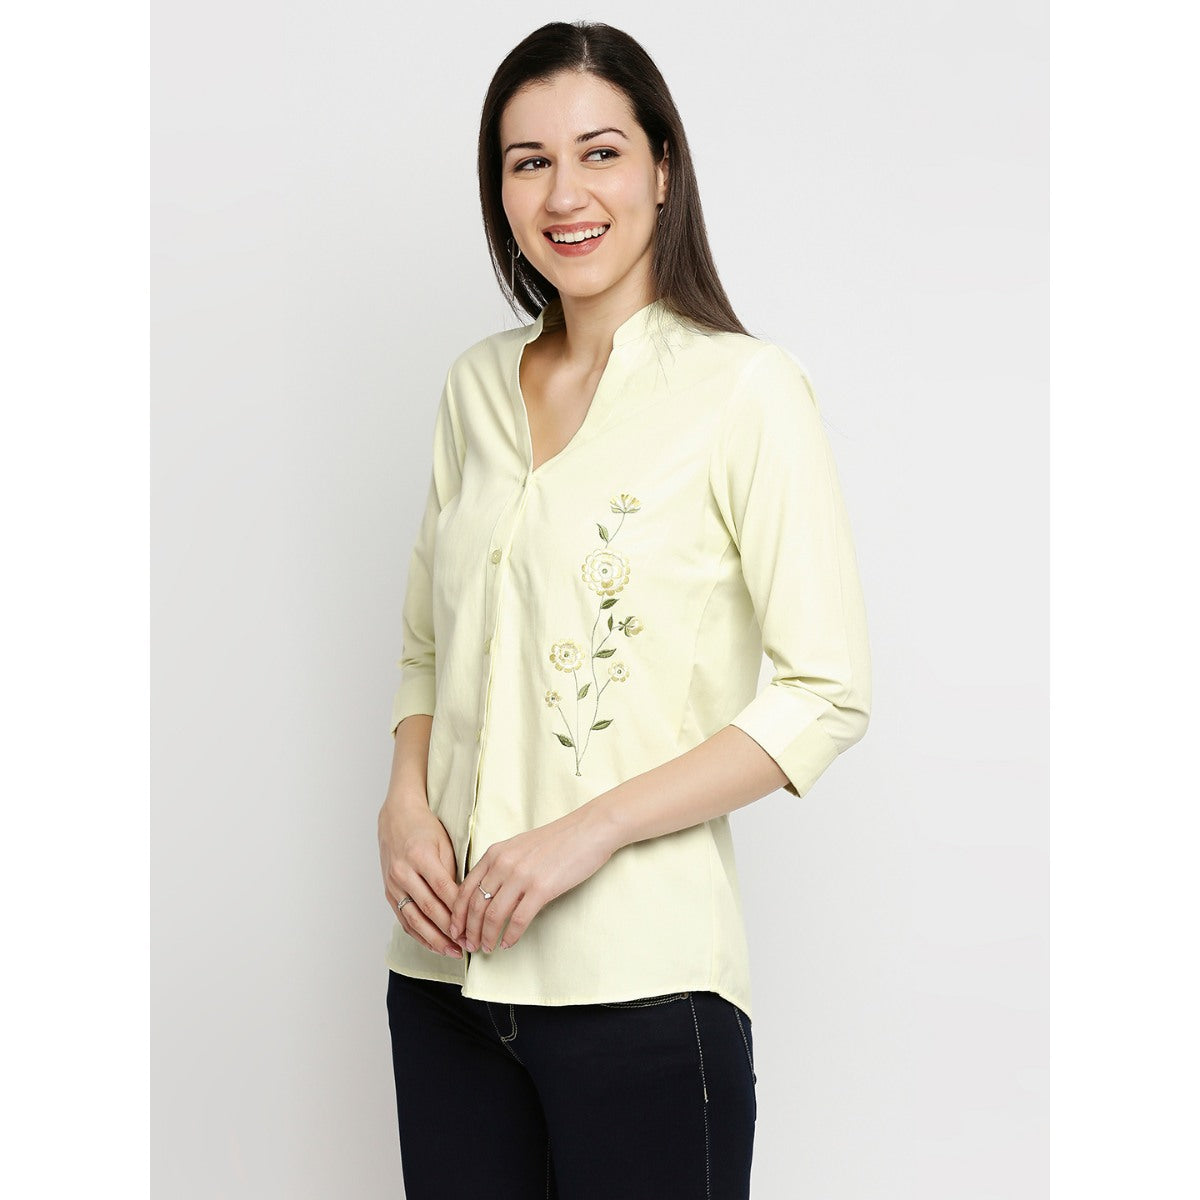 Mantra yellow V` neck embroided shirt